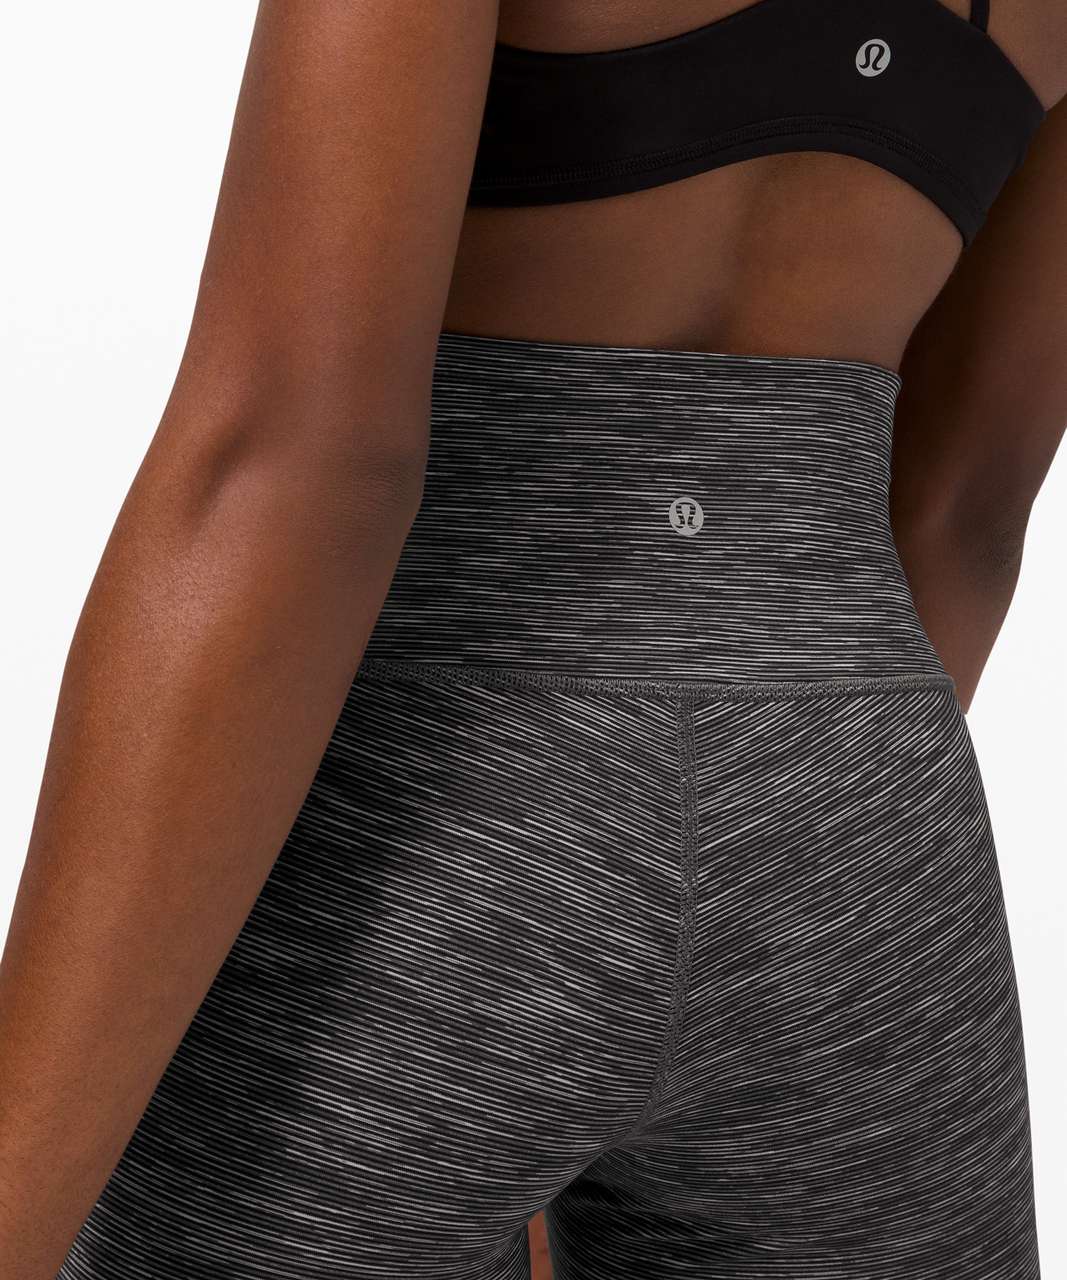 Lululemon Wunder Under High-Rise Tight 25" *Luxtreme - Wee Are From Space Dark Carbon Ice Grey